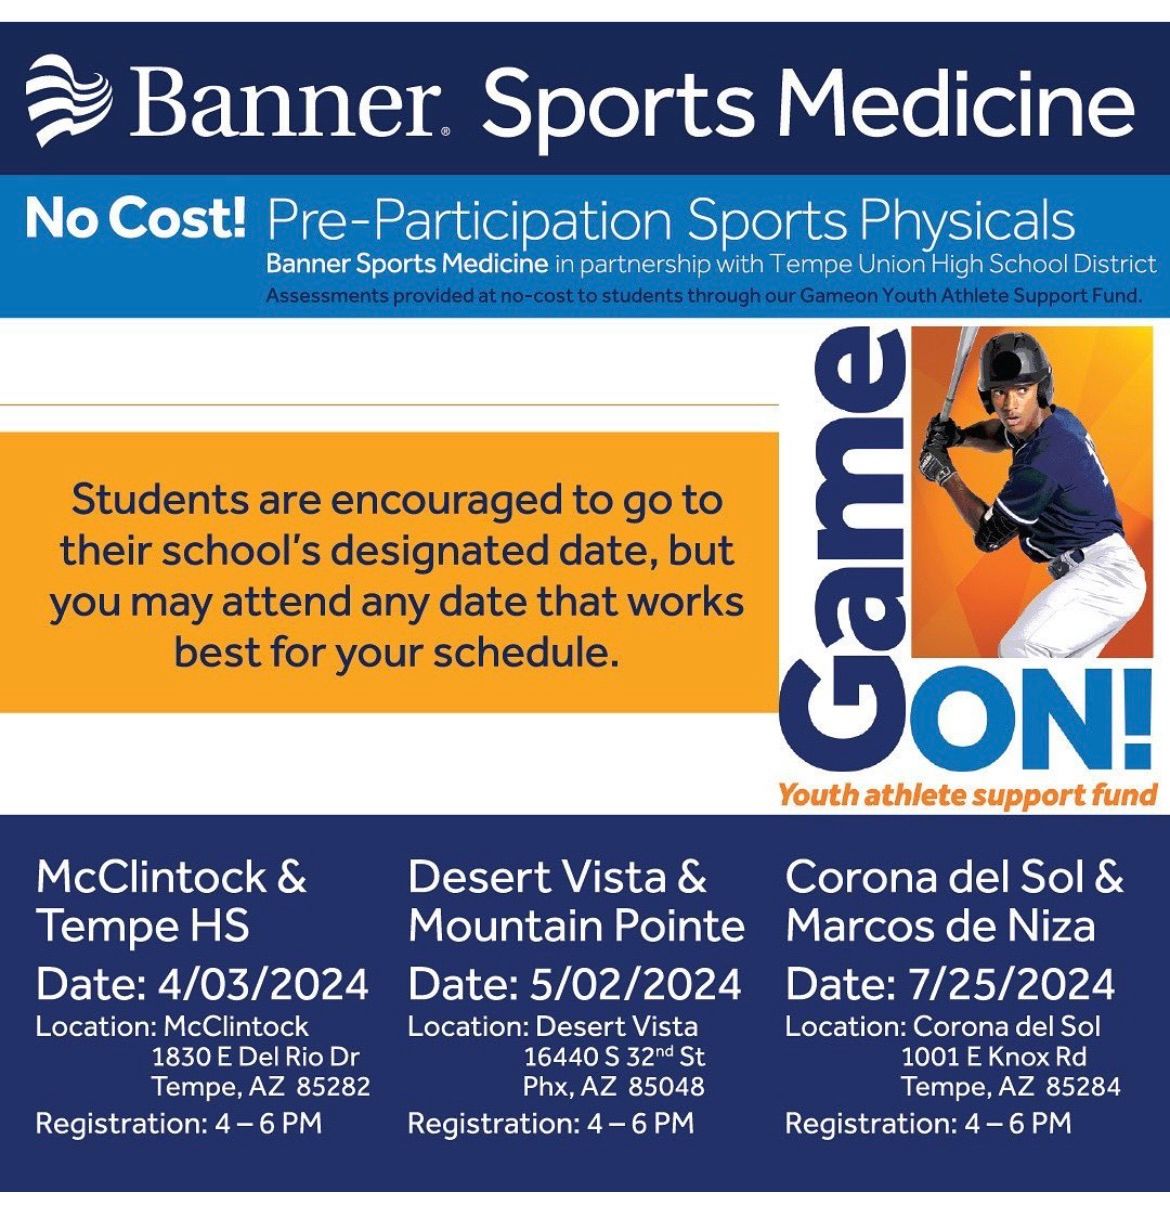 Free Sports Physicals